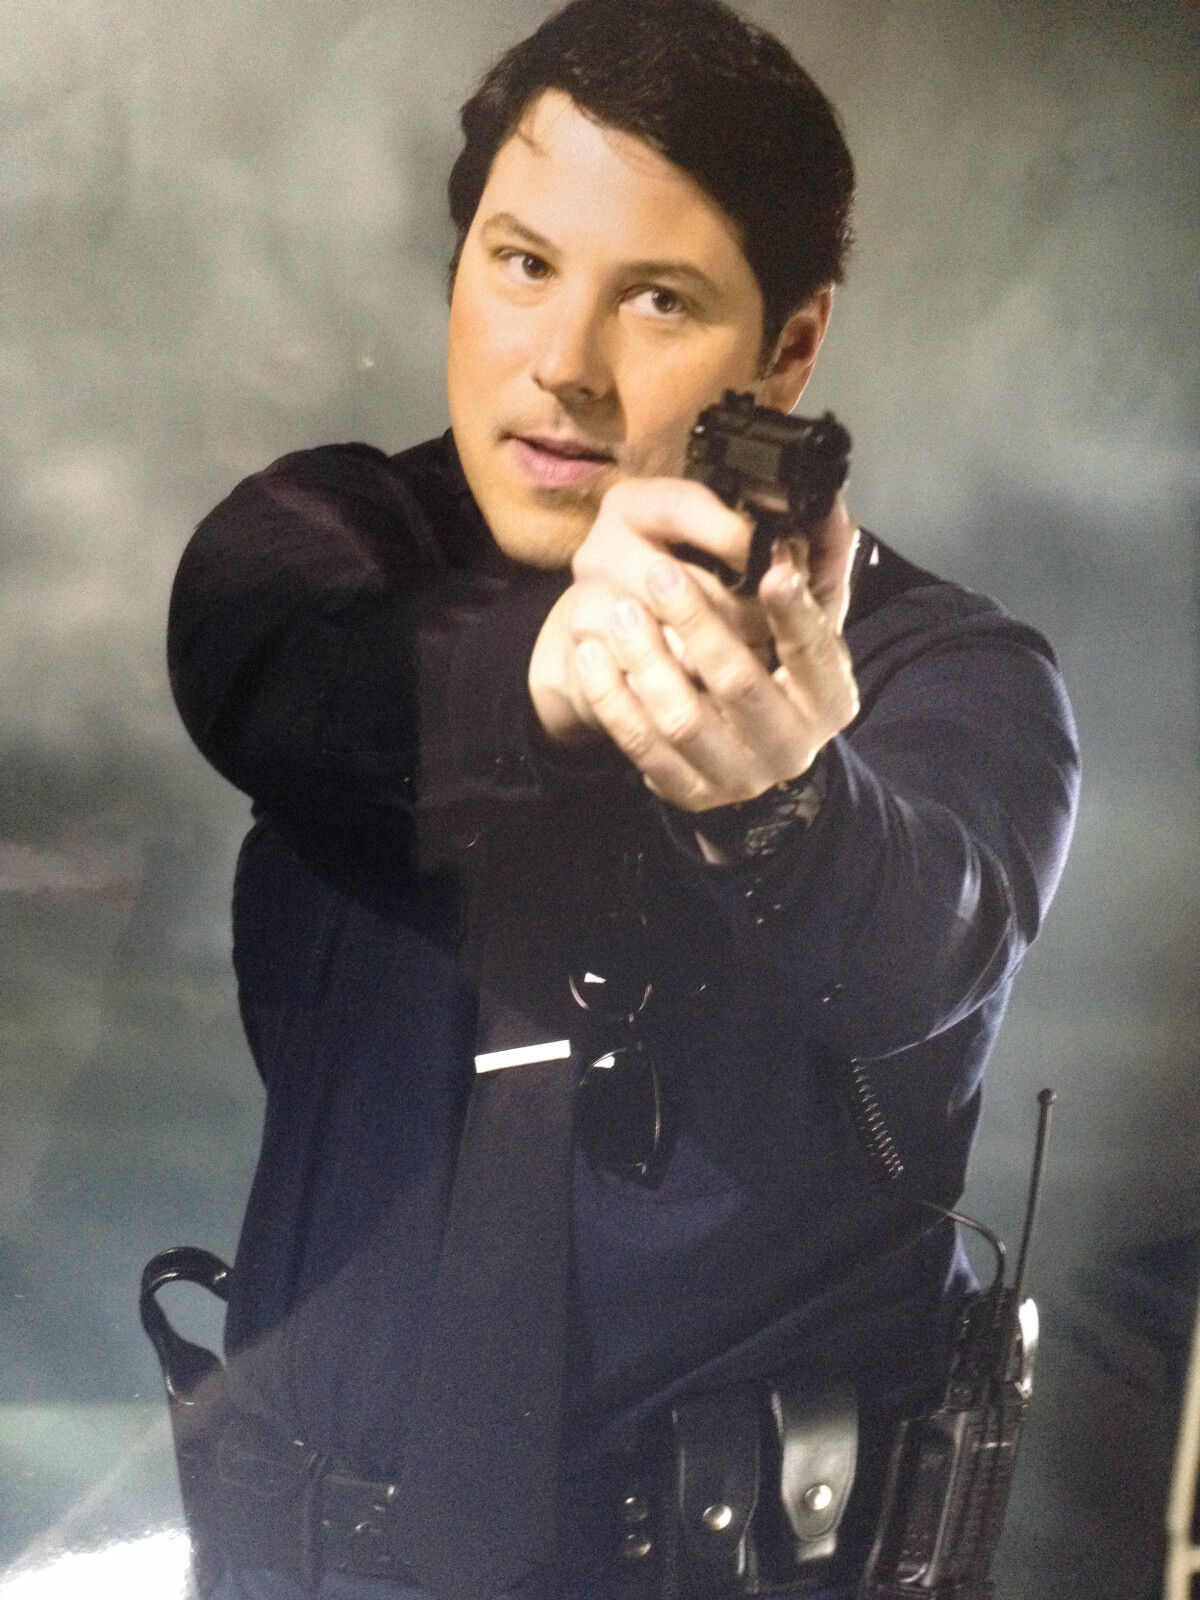 GREG GRUNBERG - HEROES ACTOR - SUPER COLOUR Photo Poster paintingGRAPH